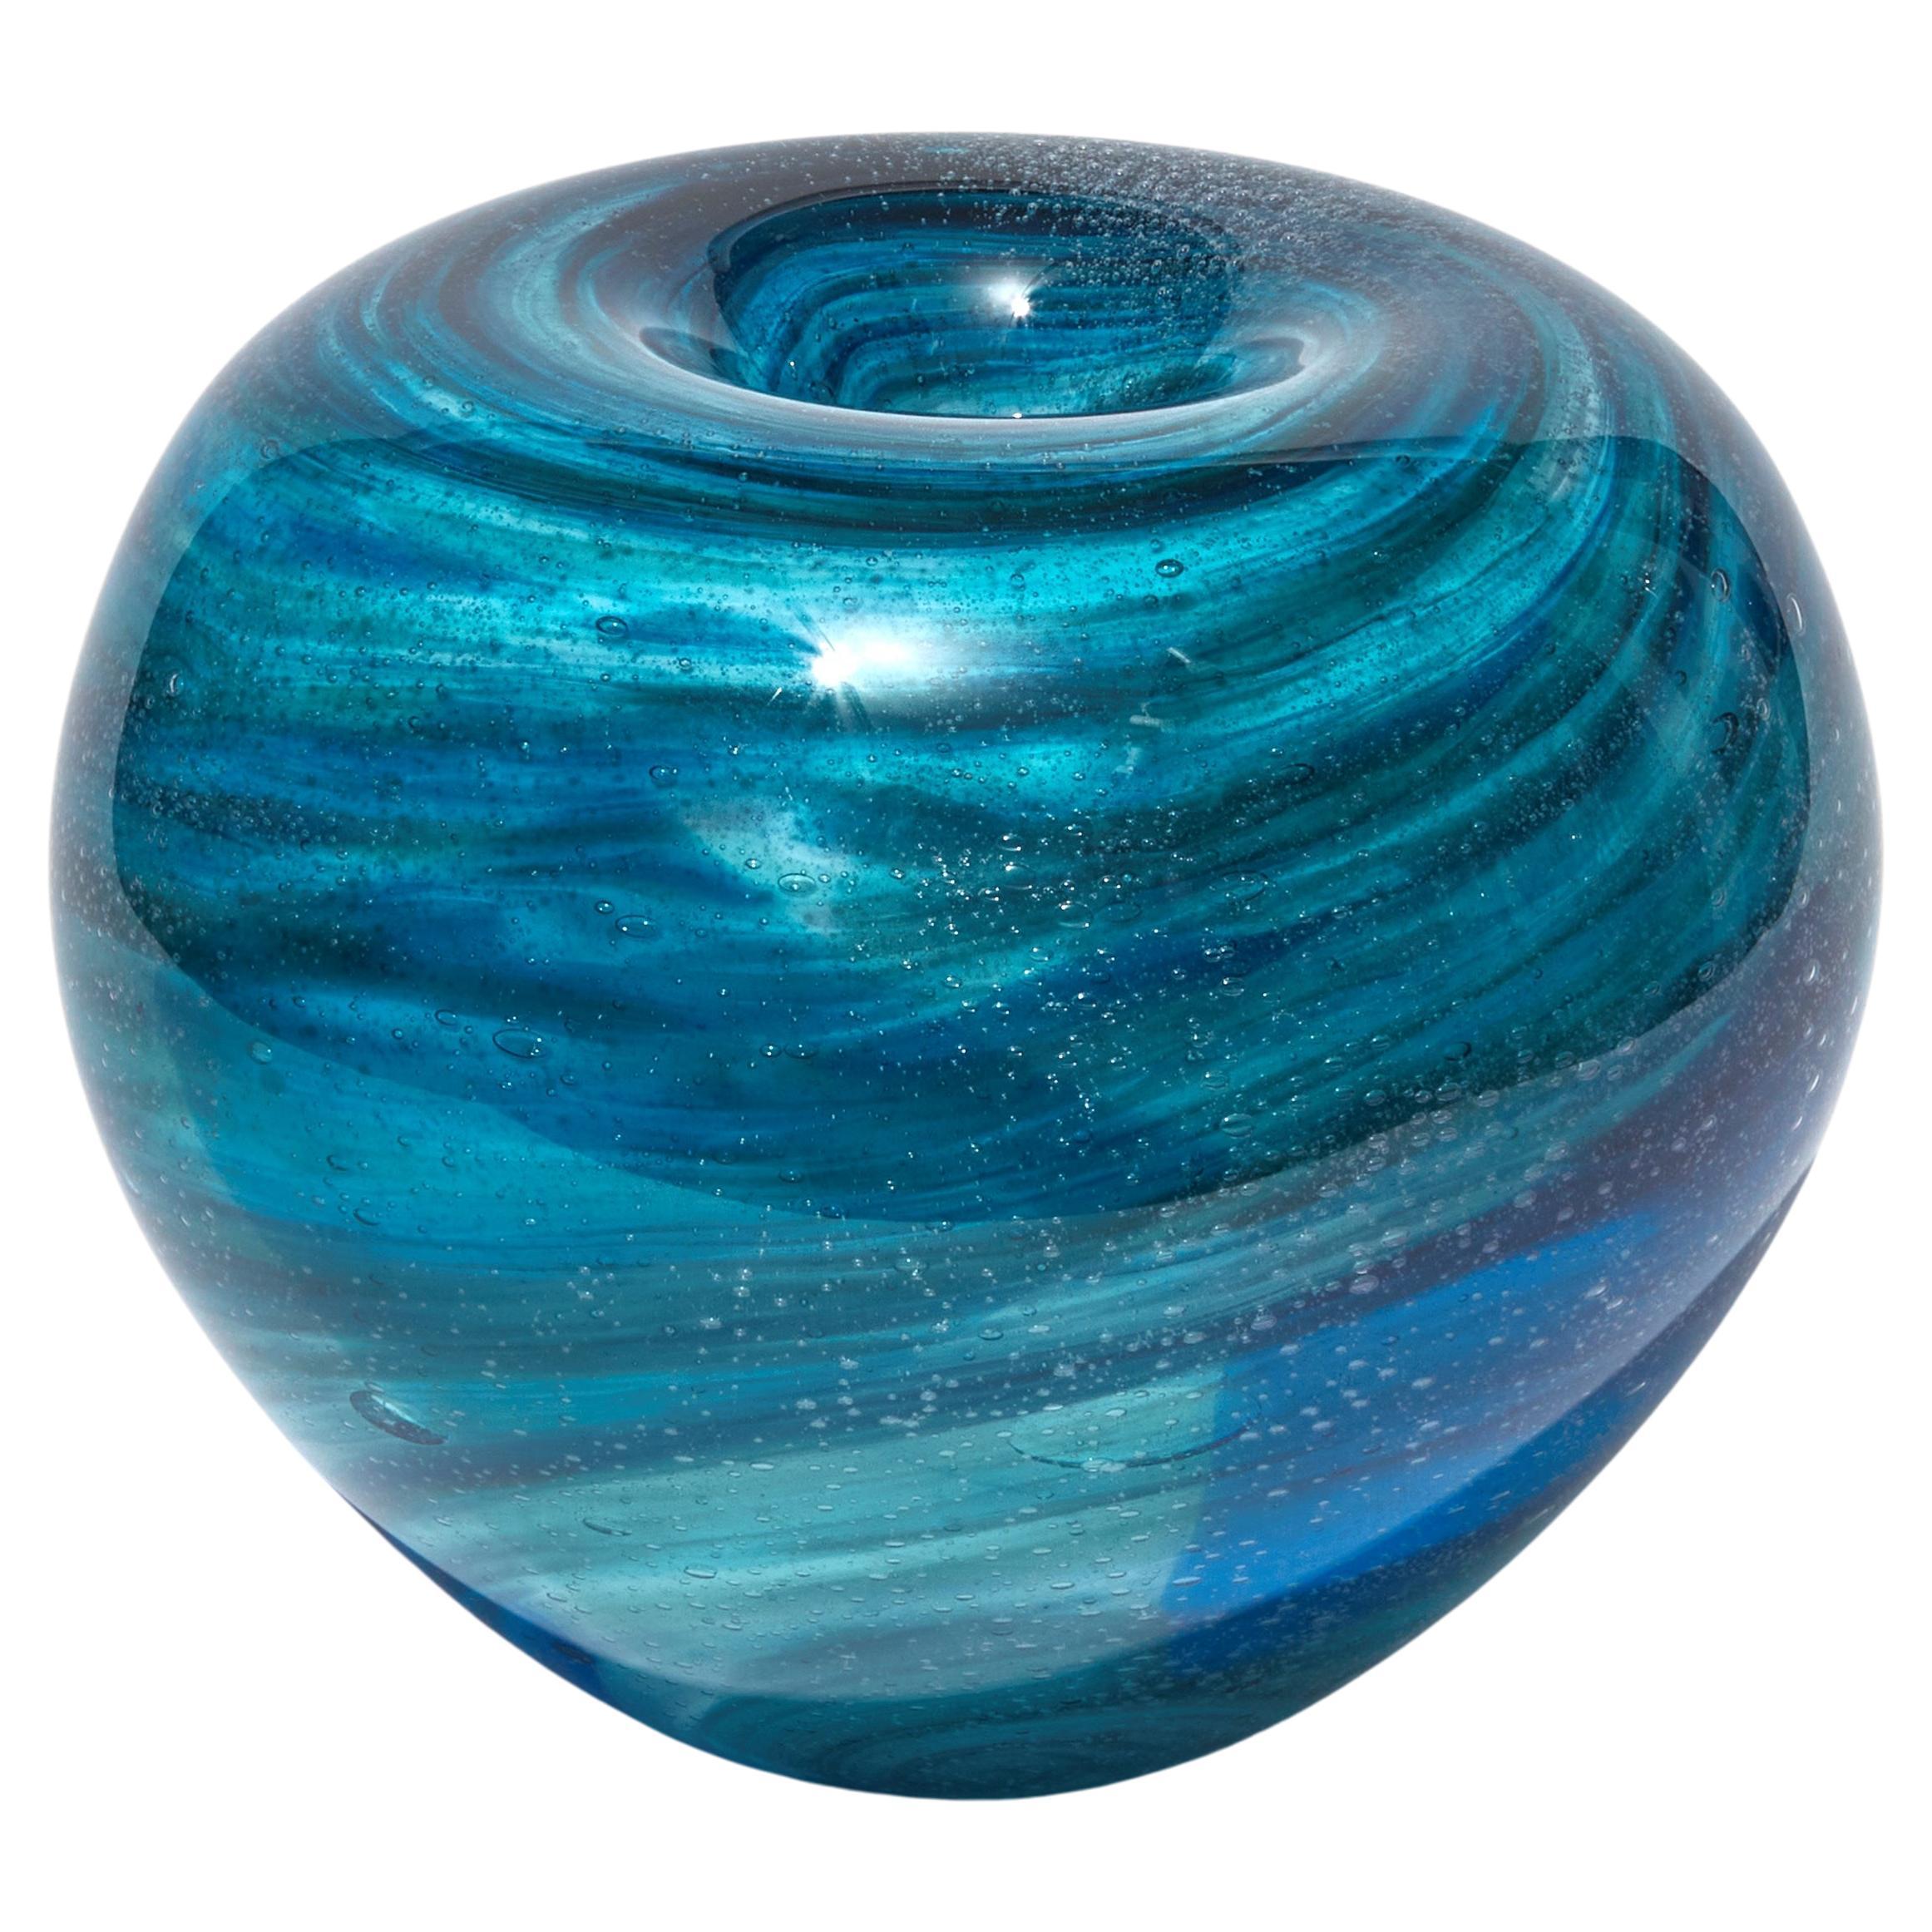 Maelstrom, Blue & Aqua Glass Sculptural Centrepiece by Cathryn Shilling For Sale